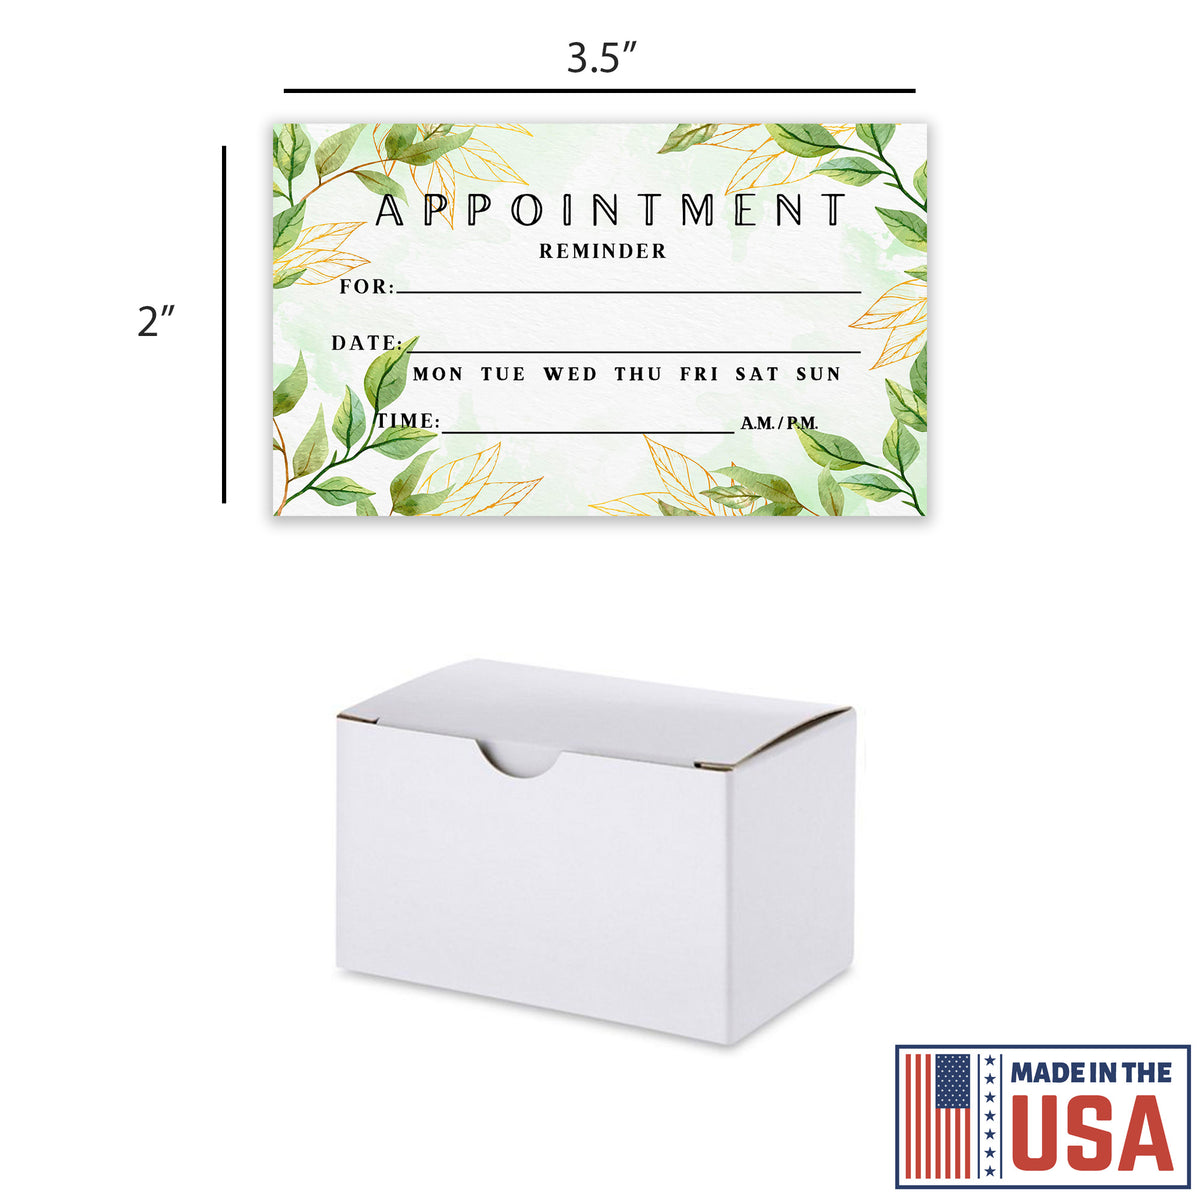 Premium Appointment Business Cards - Small 3.5&quot; x 2&quot; Card 100 Cards